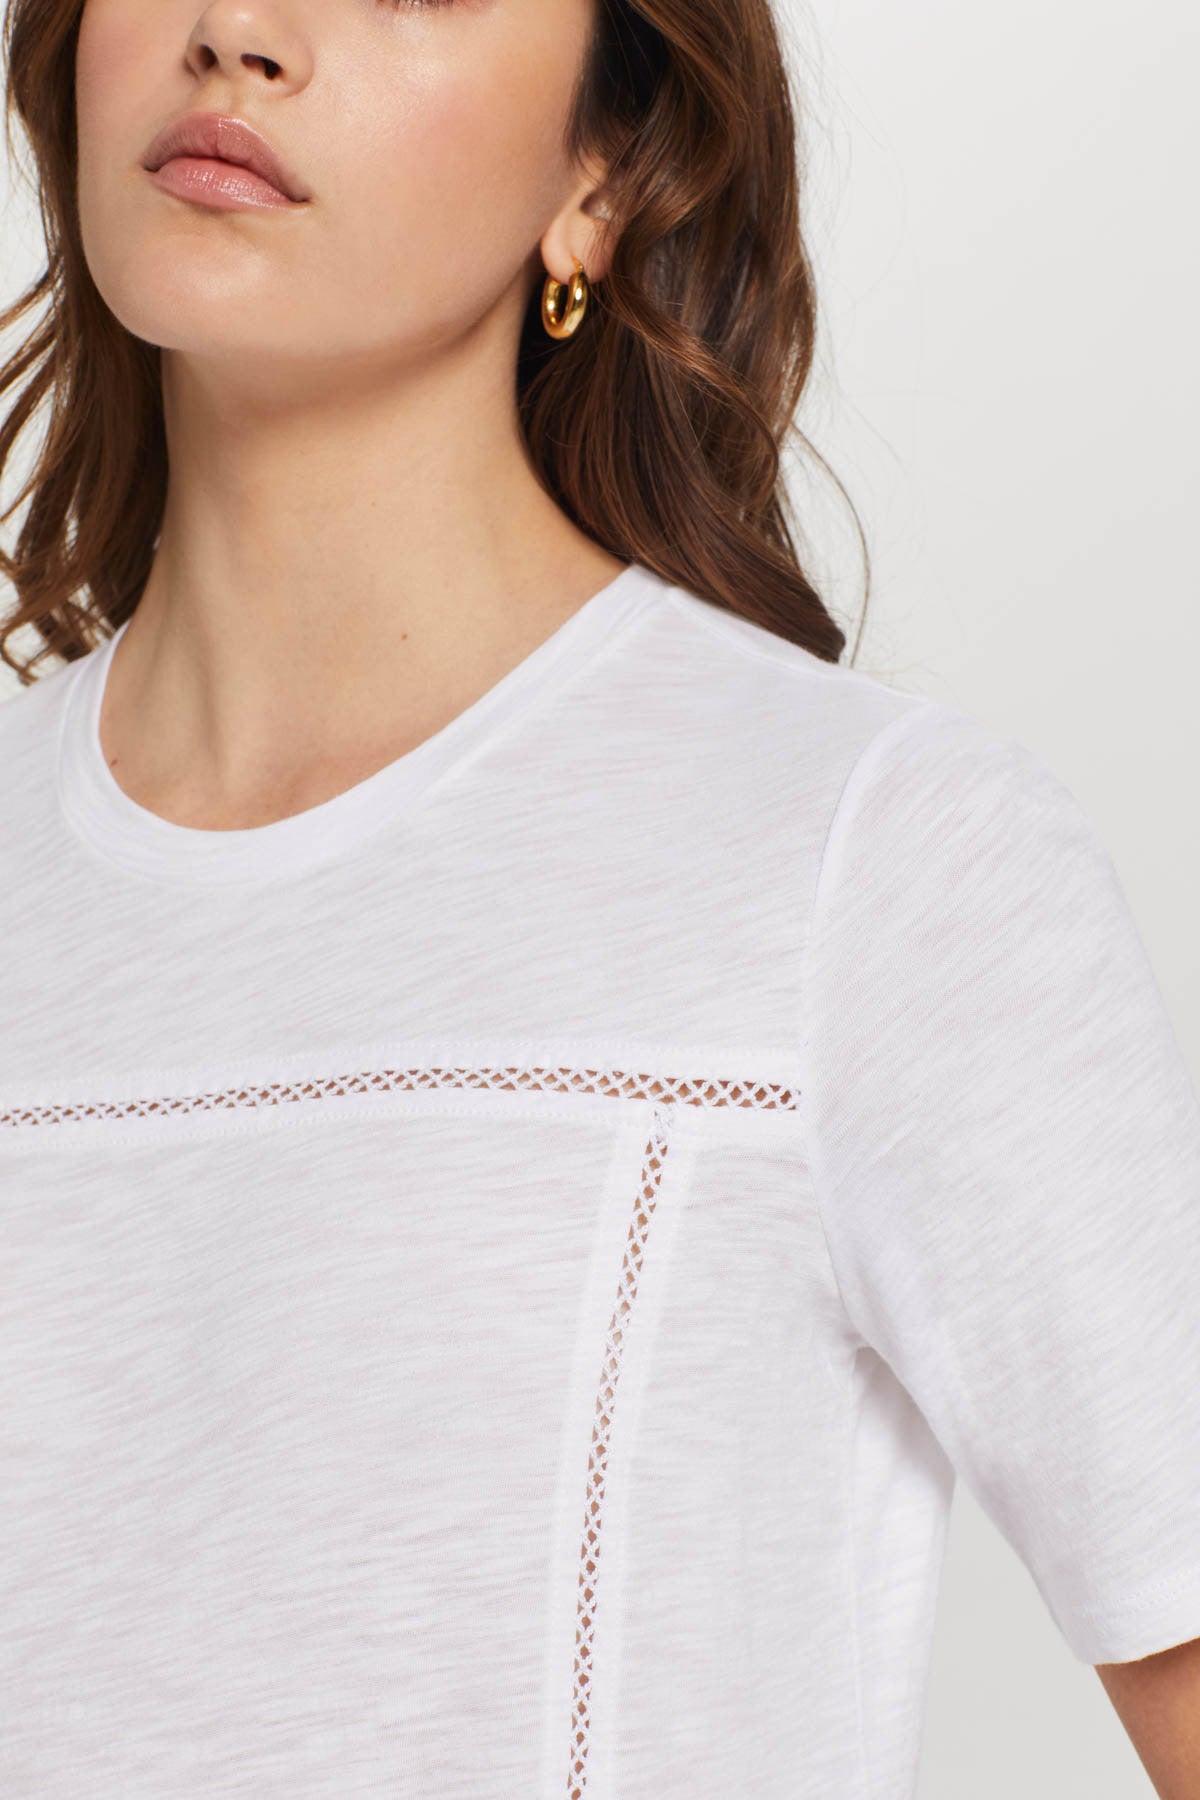 Honor Embroidered Tee - Goldie Lewinter